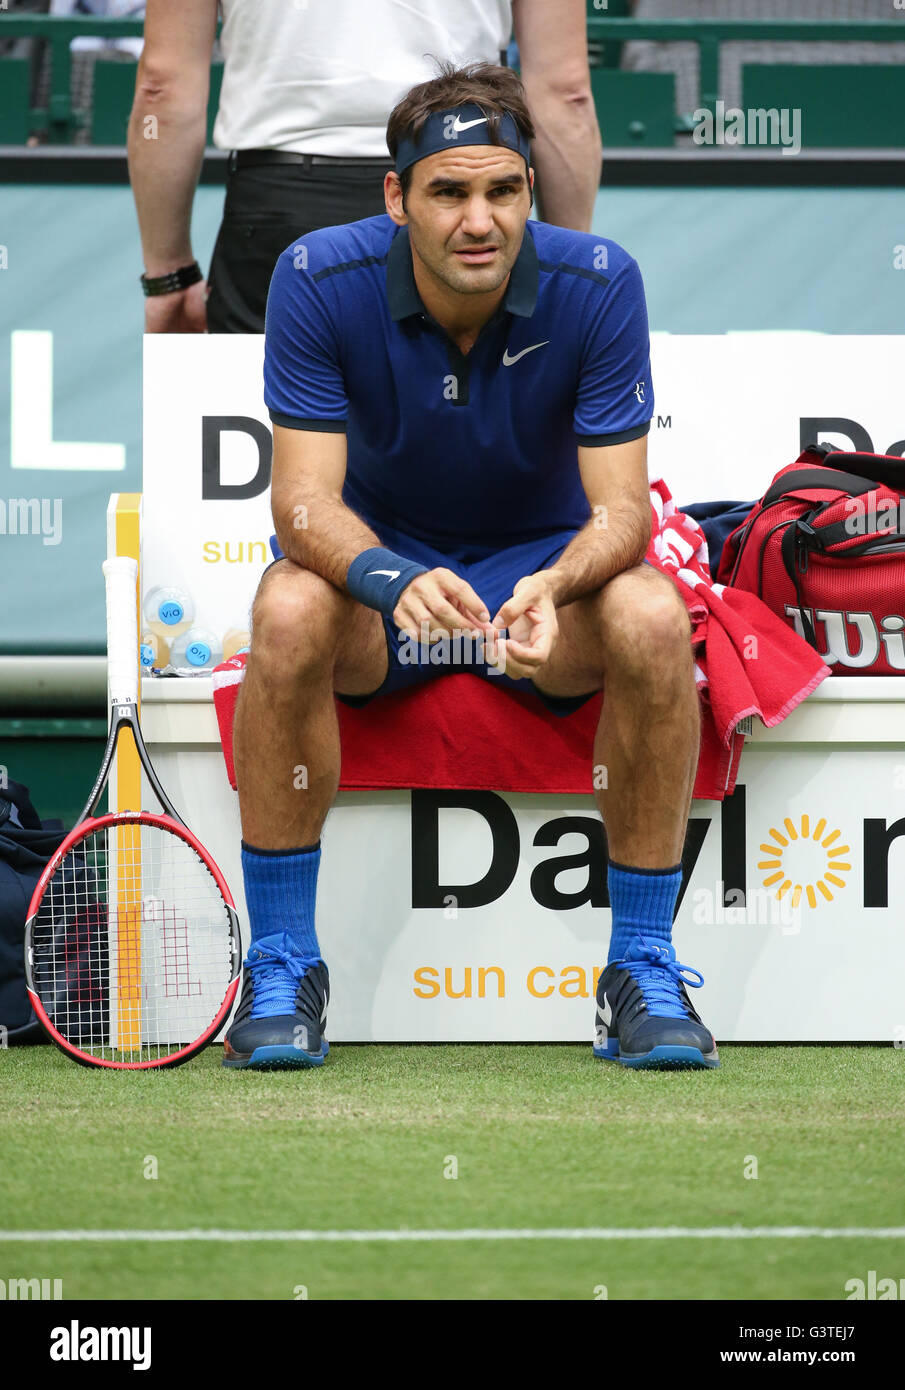 Halle, Germany. 15th June, 2016. Roger Federer of Switzerland sits after  his victory in the match against Struff of Germany during the ATP tennis  tournament in Halle, Germany, 15 June 2016. Photo: